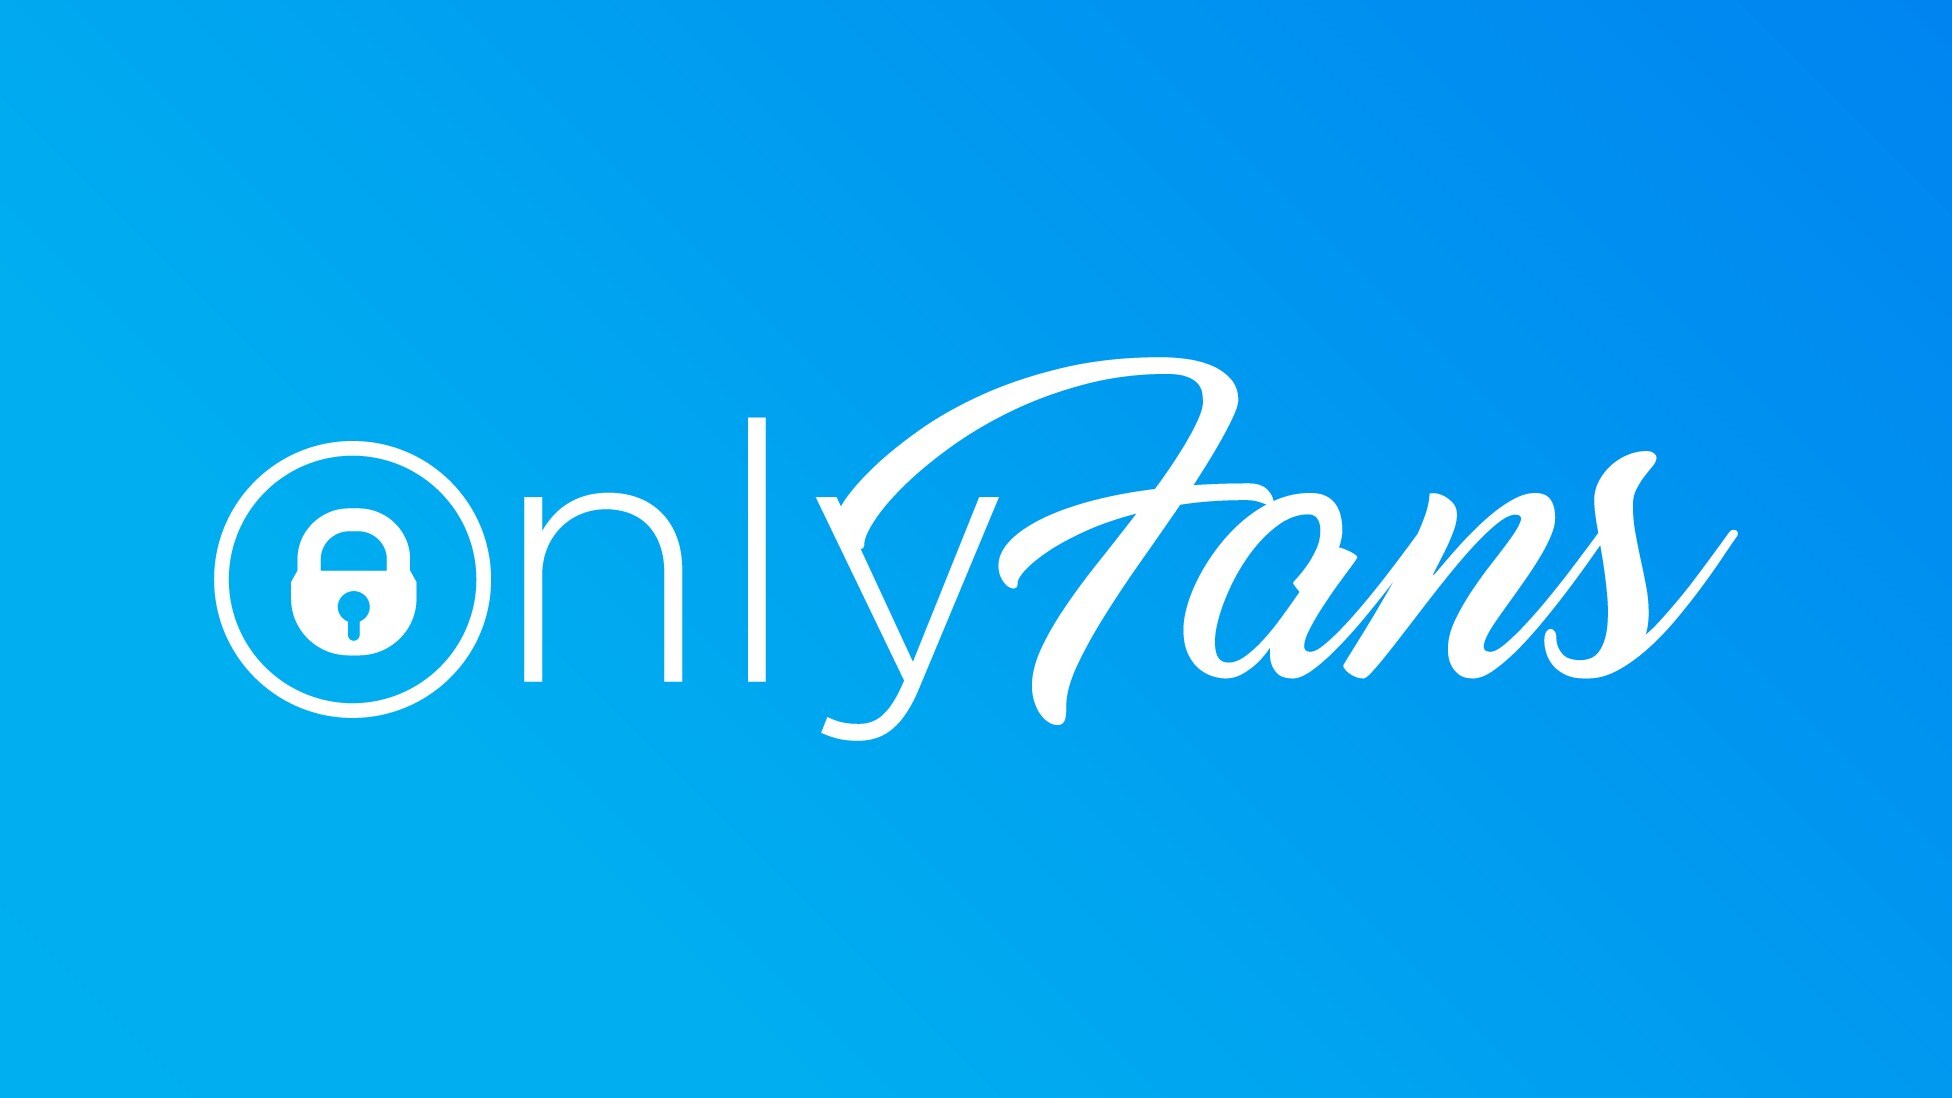 Fans of only